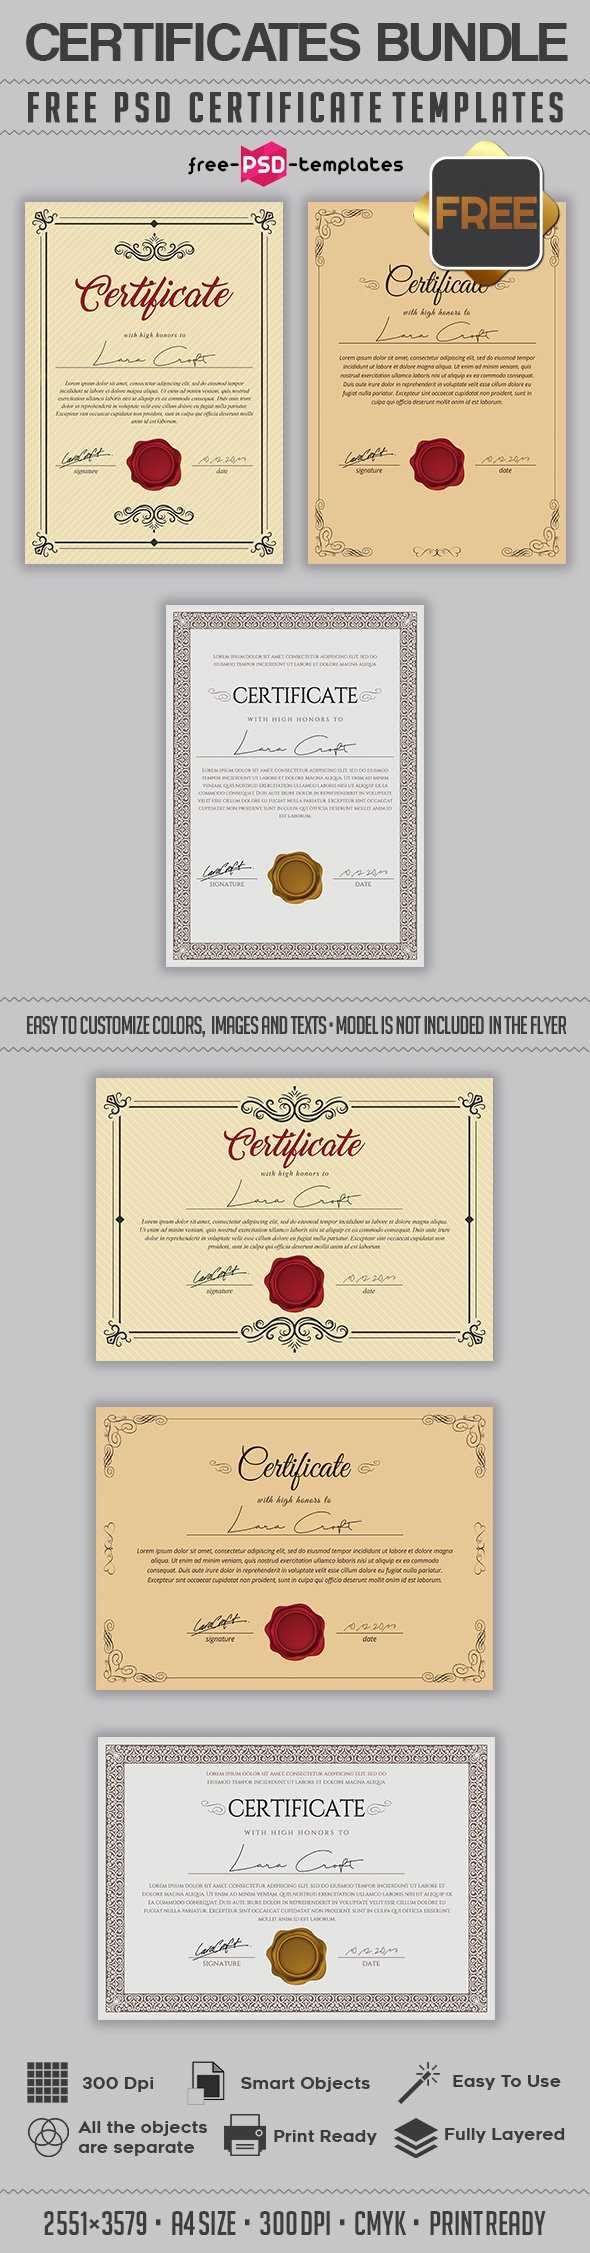 100+ [ Certificate Templates Psd ] | Free Tri Fold Brochure In This Certificate Entitles The Bearer To Template